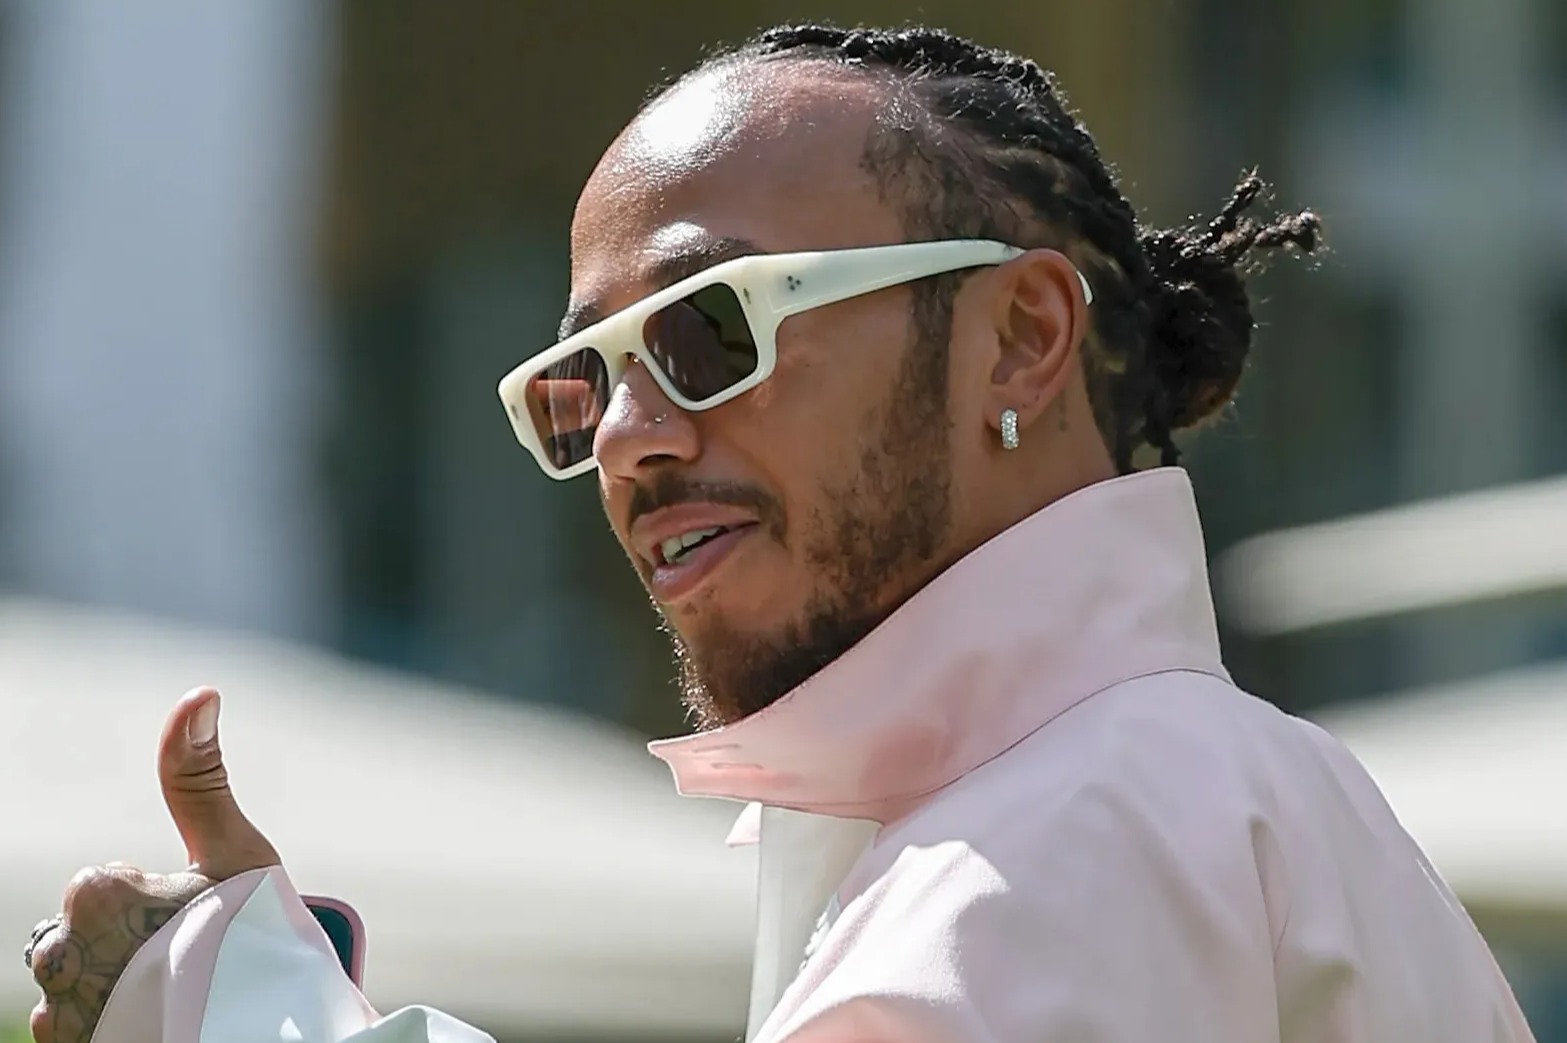 Lewis Hamilton's acting debut set to be one of the costliest films EVER at £240M